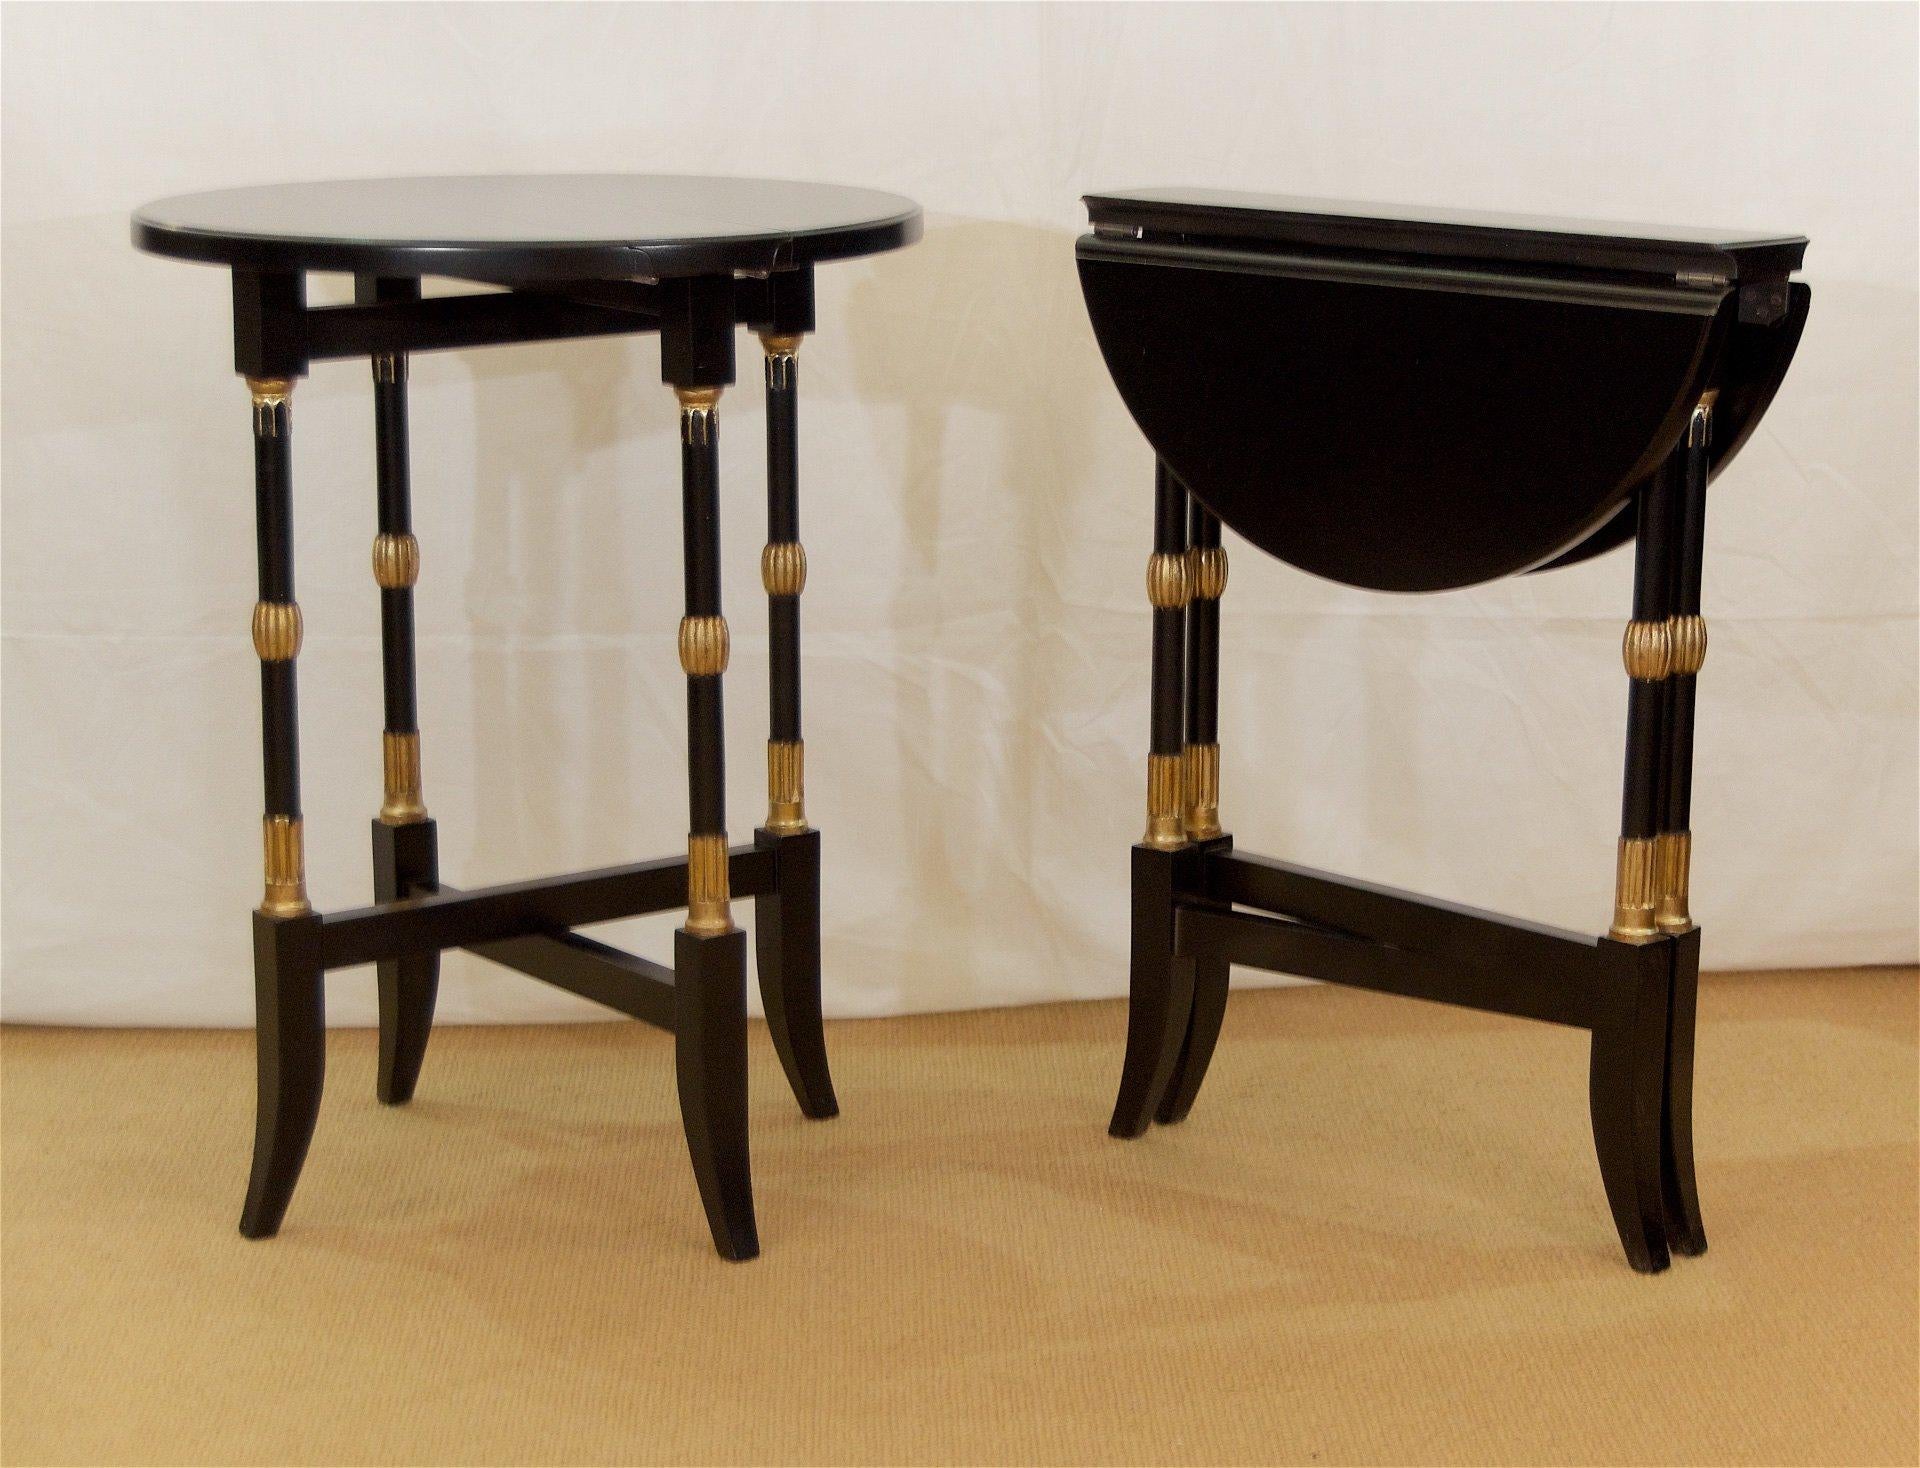 Black Lacquer Regency-Style Folding Occasional Tables from the Fontainebleau In Good Condition For Sale In Stamford, CT